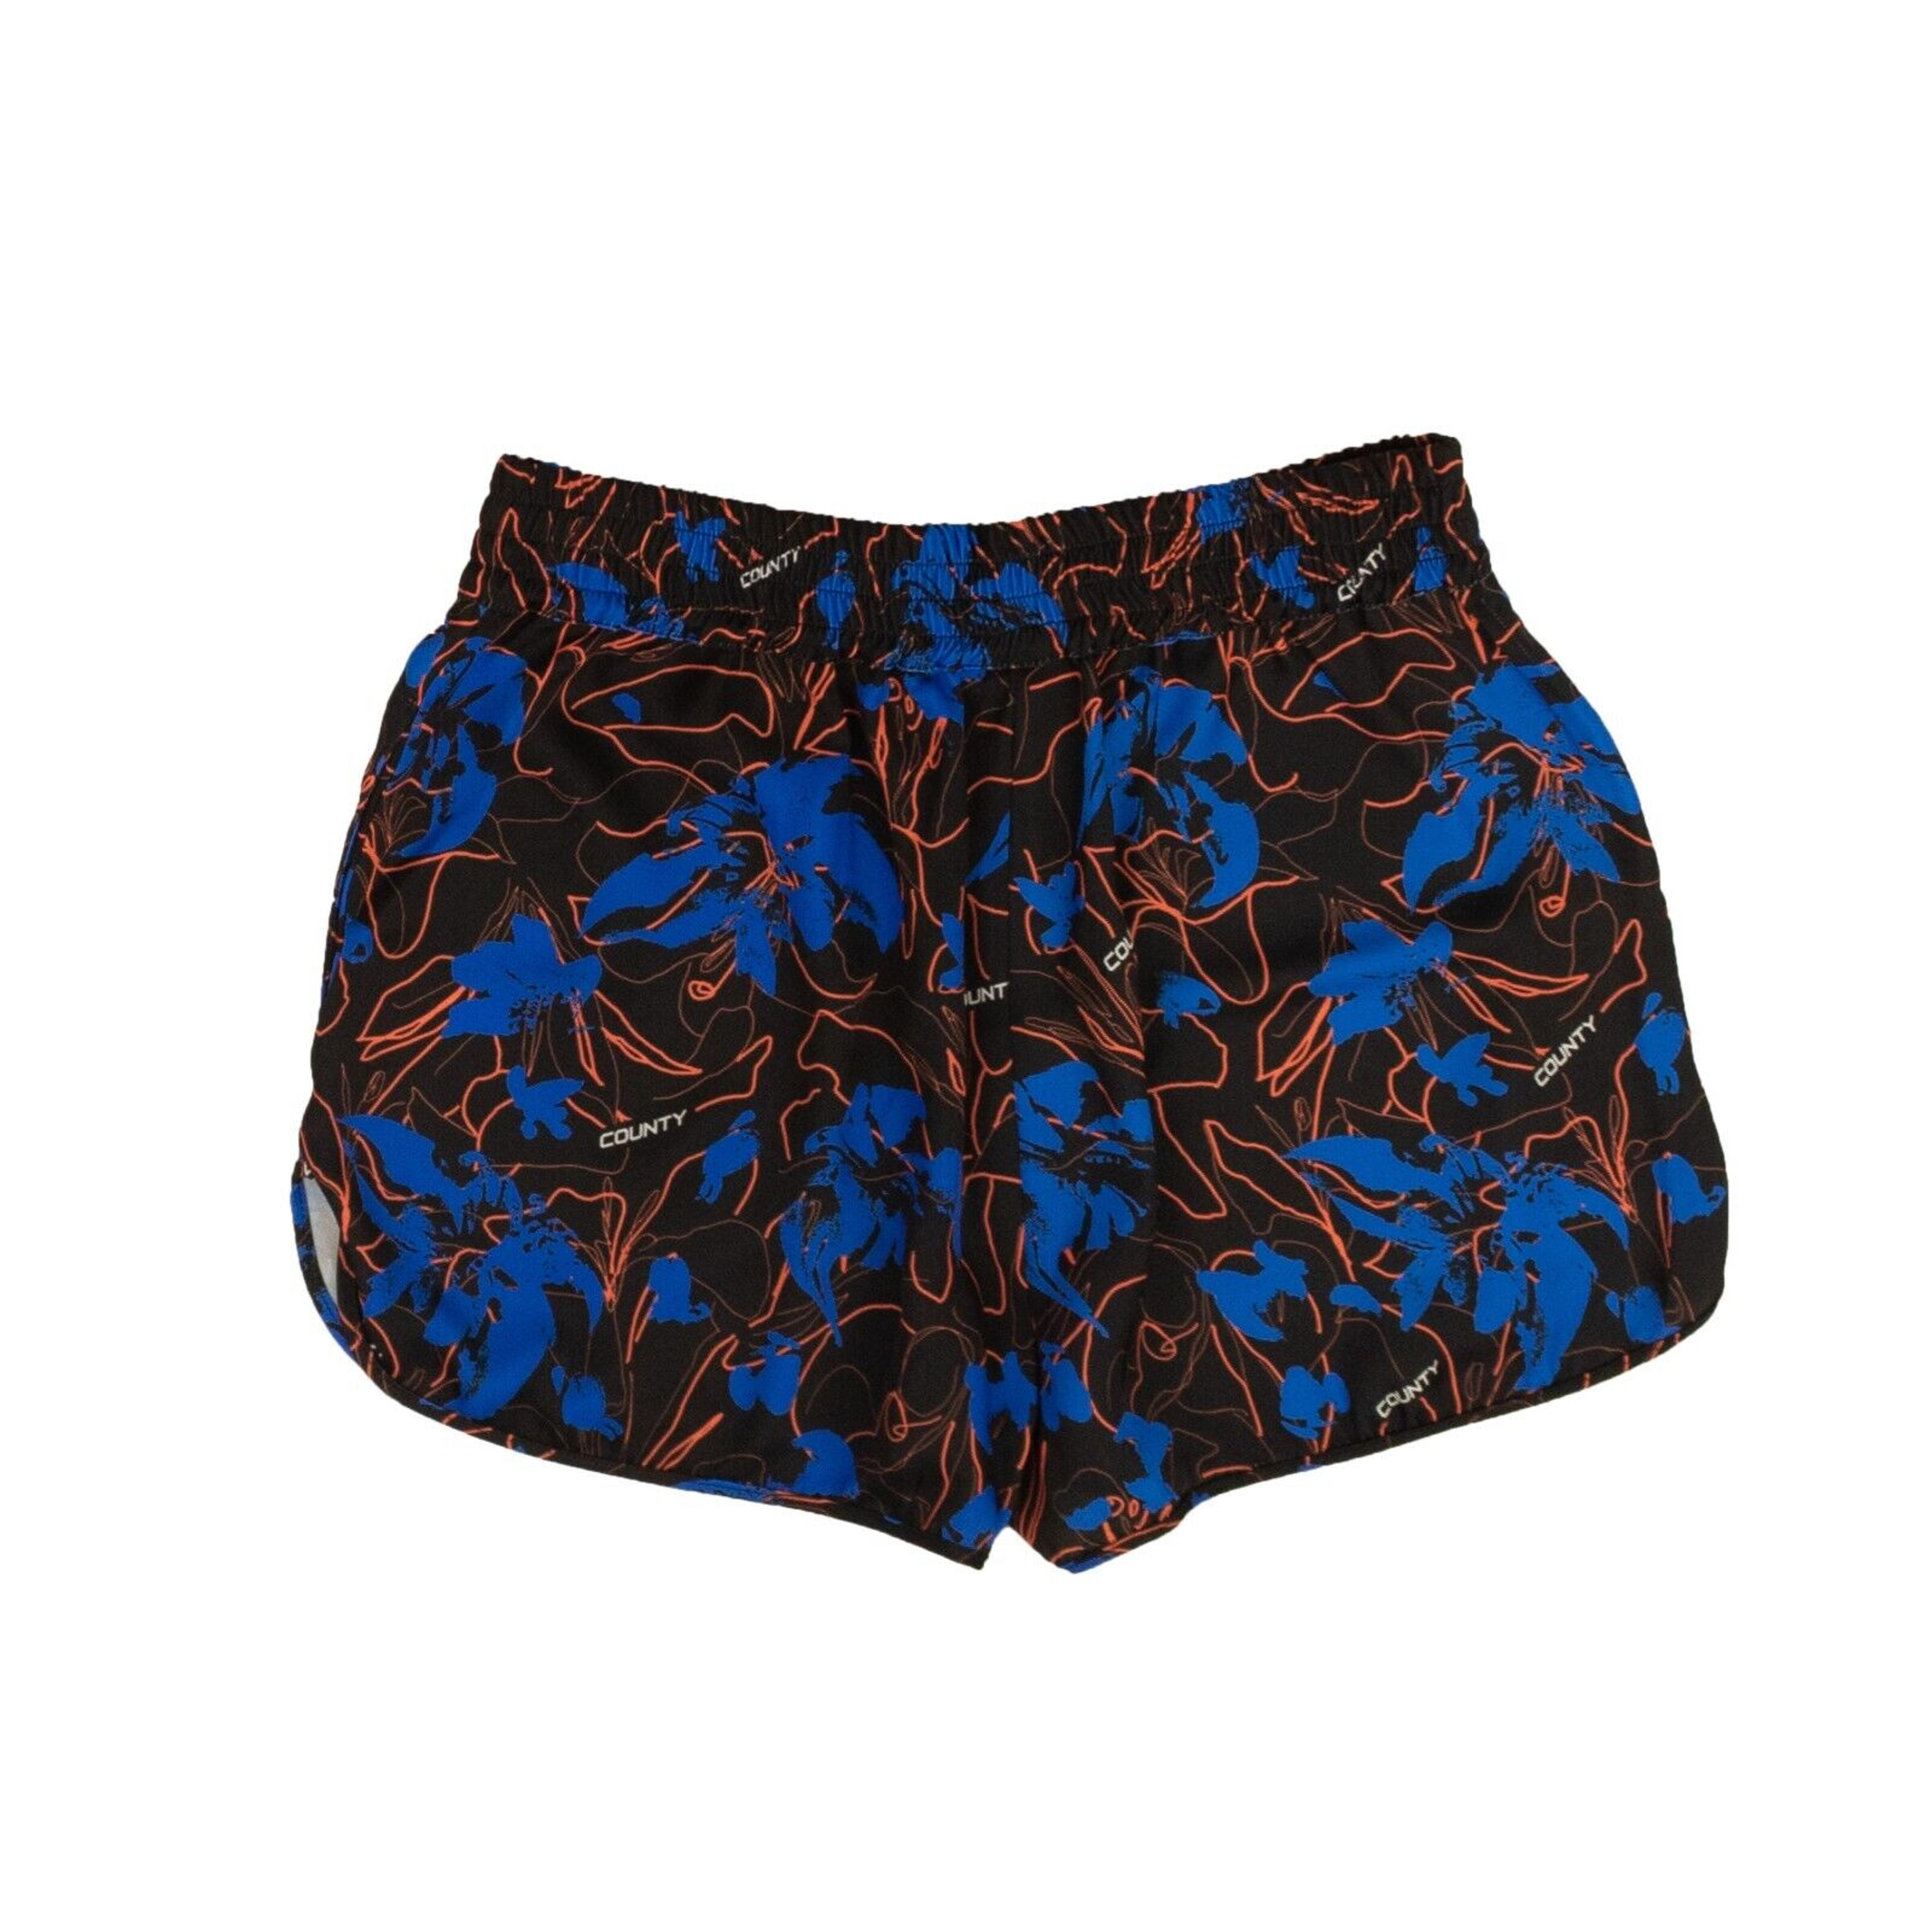 Alternate View 1 of Black And Blue County Flowers Boxer Shorts